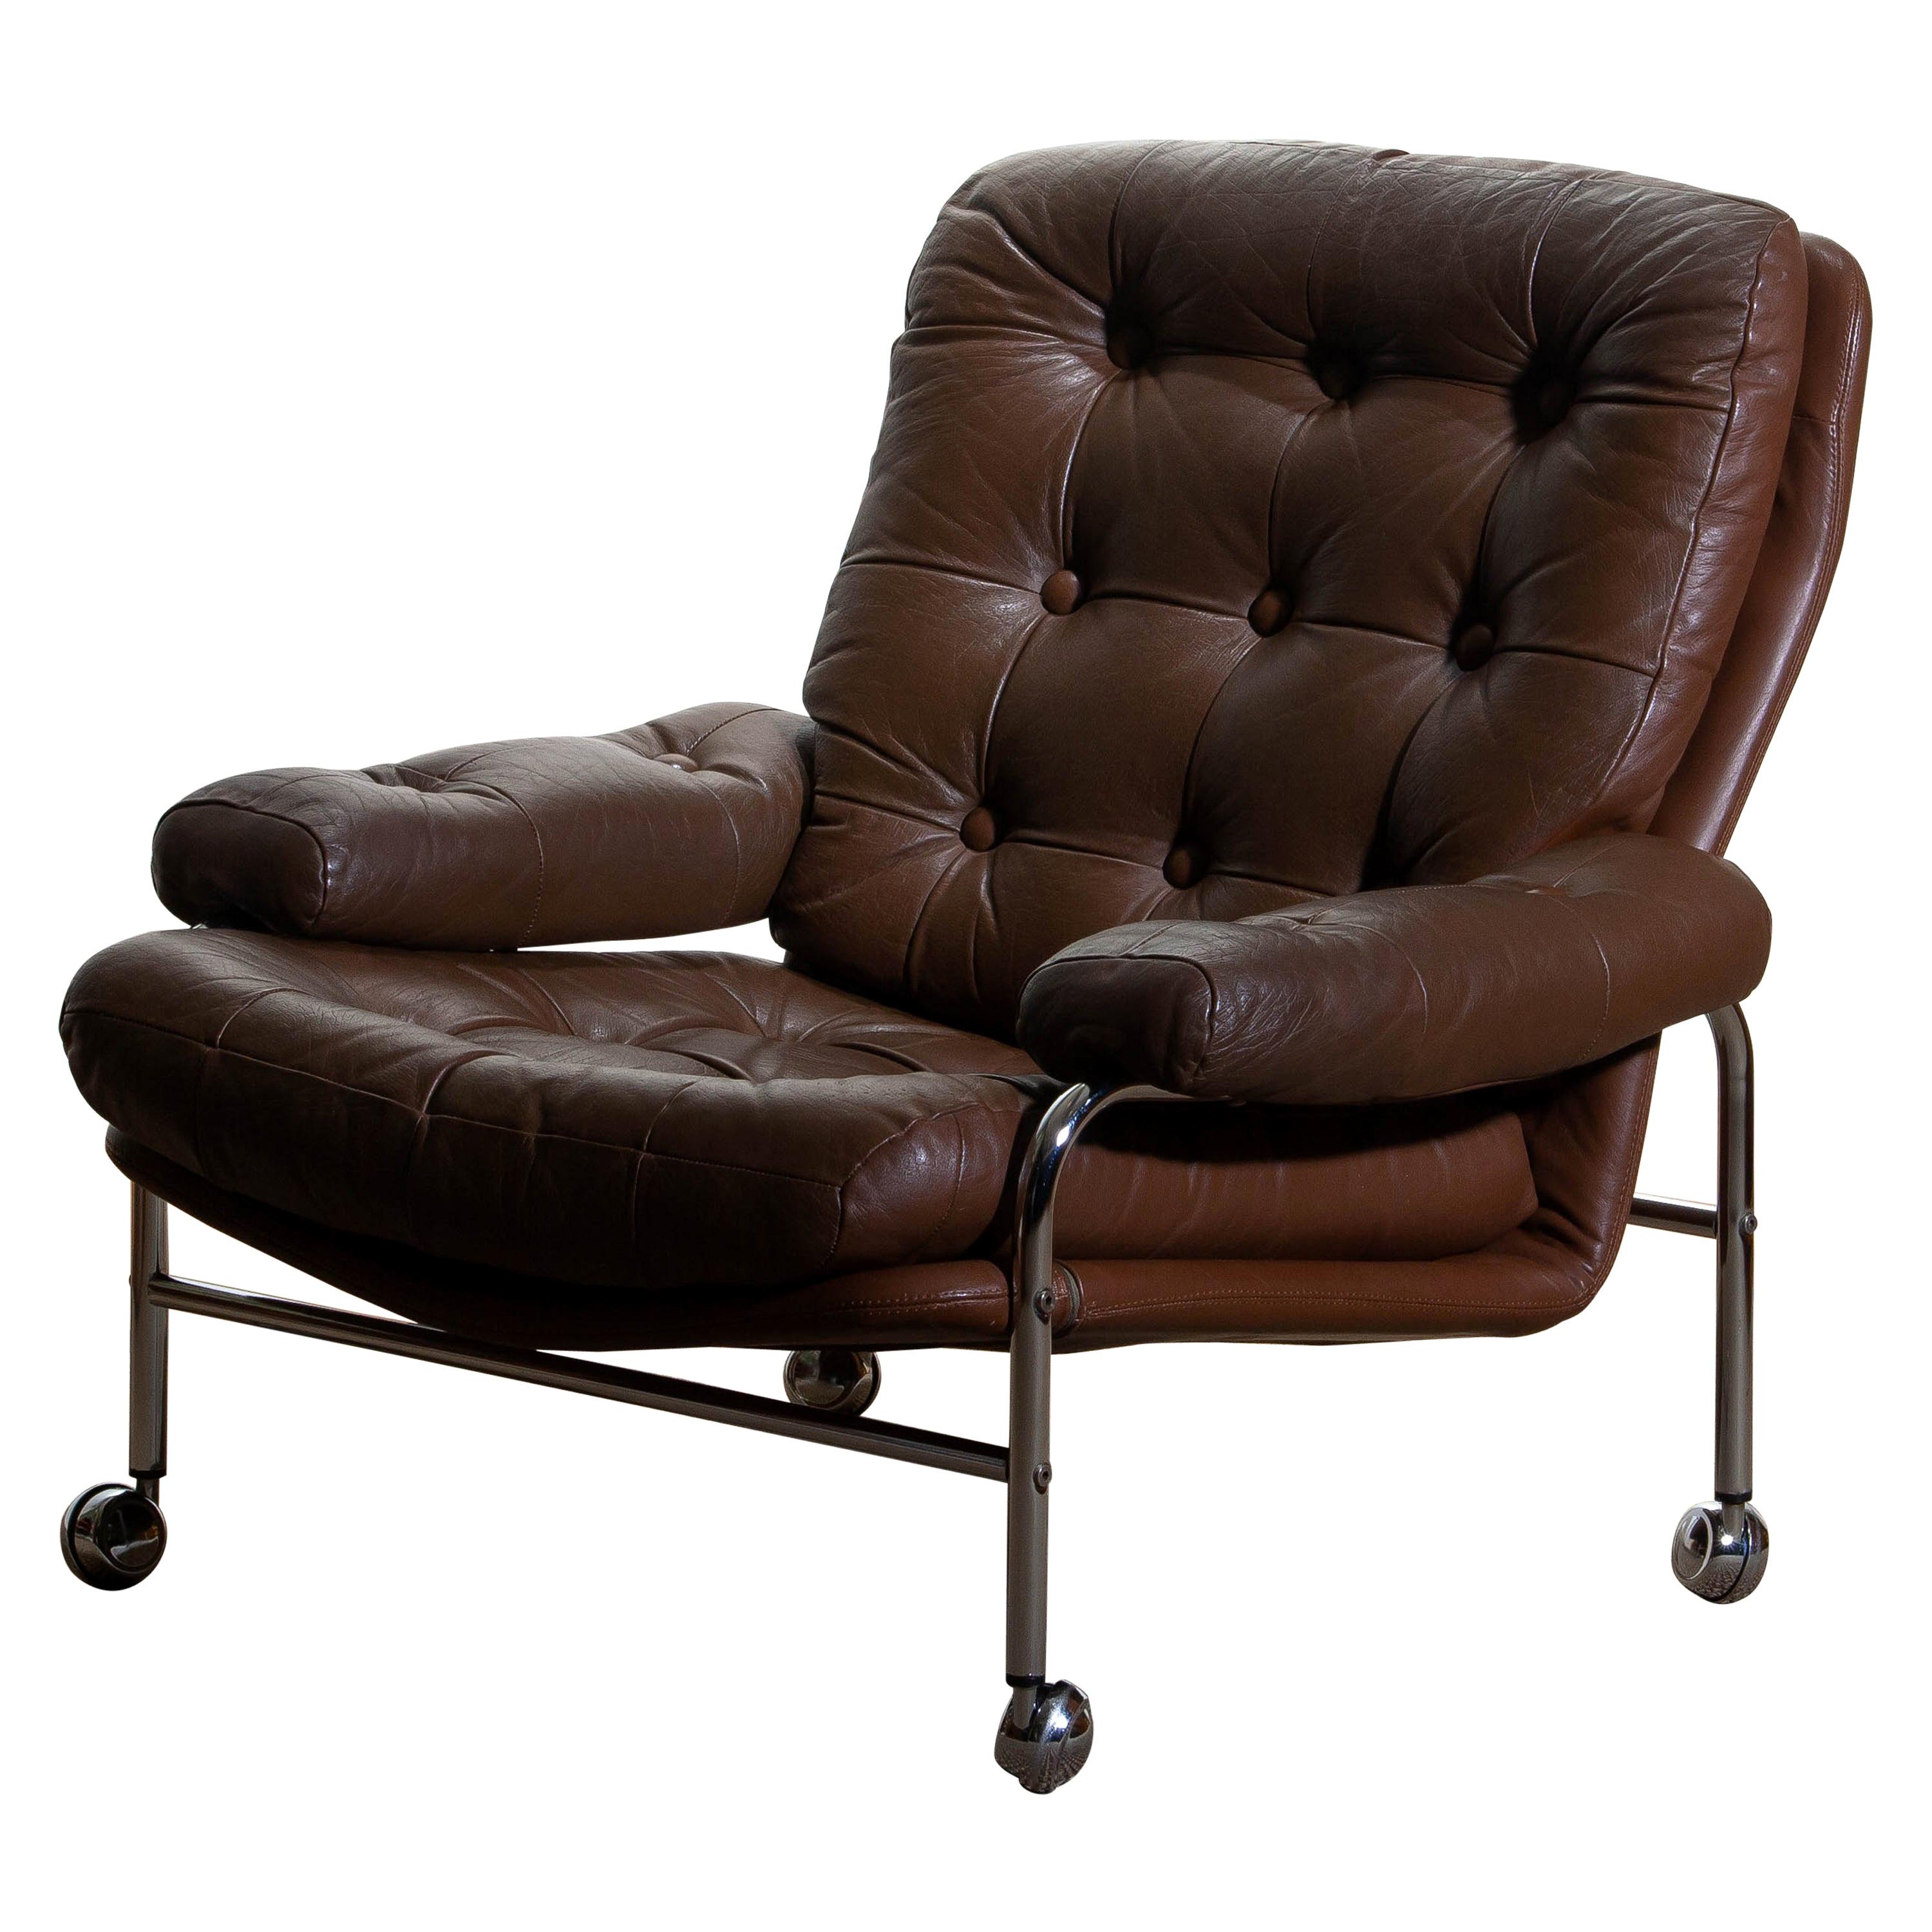 1970s, Chrome and Brown Leather Easy or Lounge Chair by Scapa Rydaholm, Sweden In Good Condition In Silvolde, Gelderland